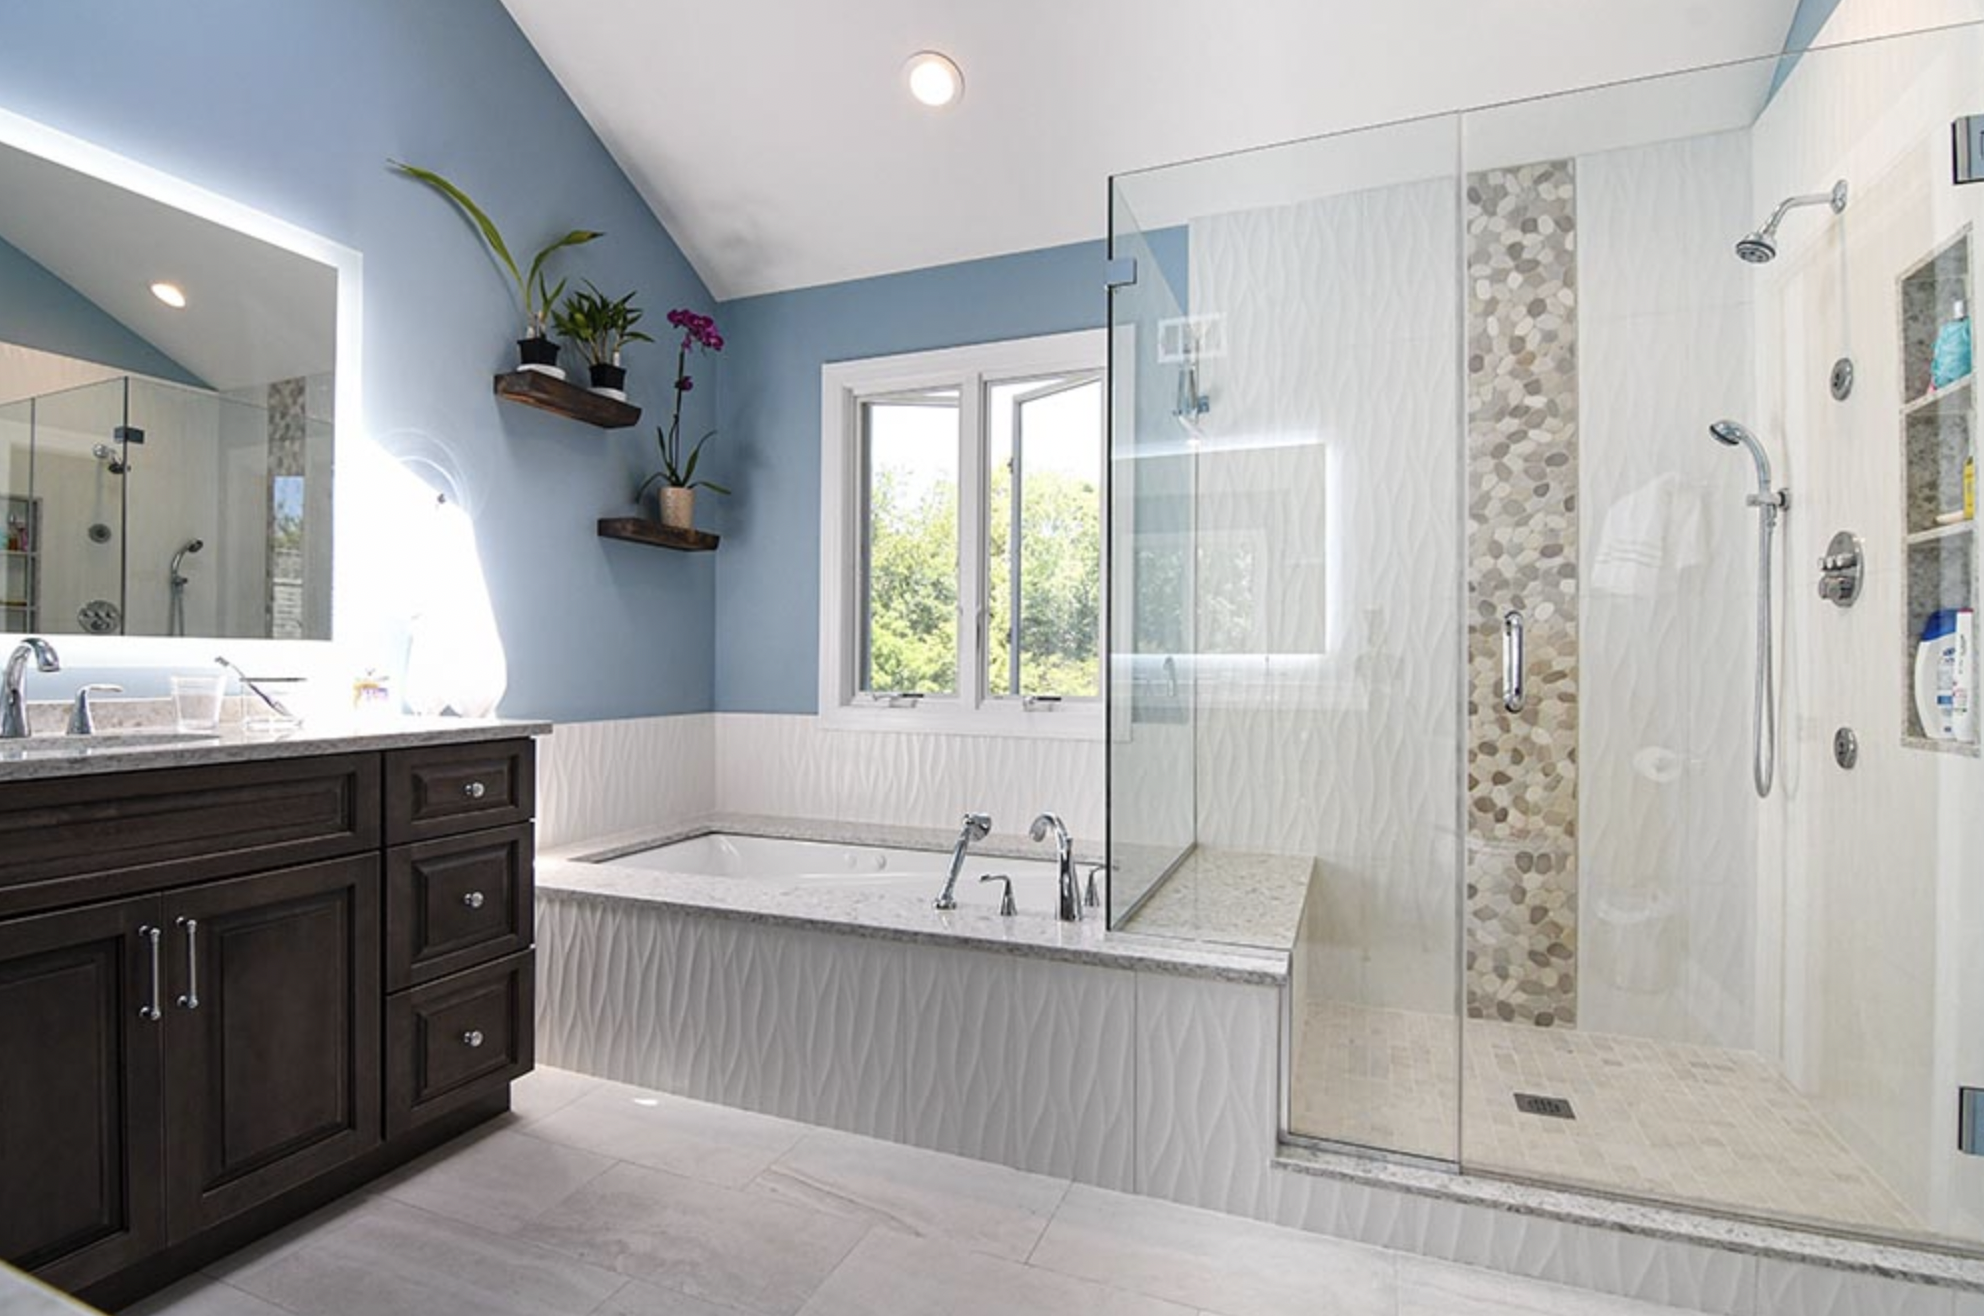 How To Know It’s Time for a Bathroom Remodel